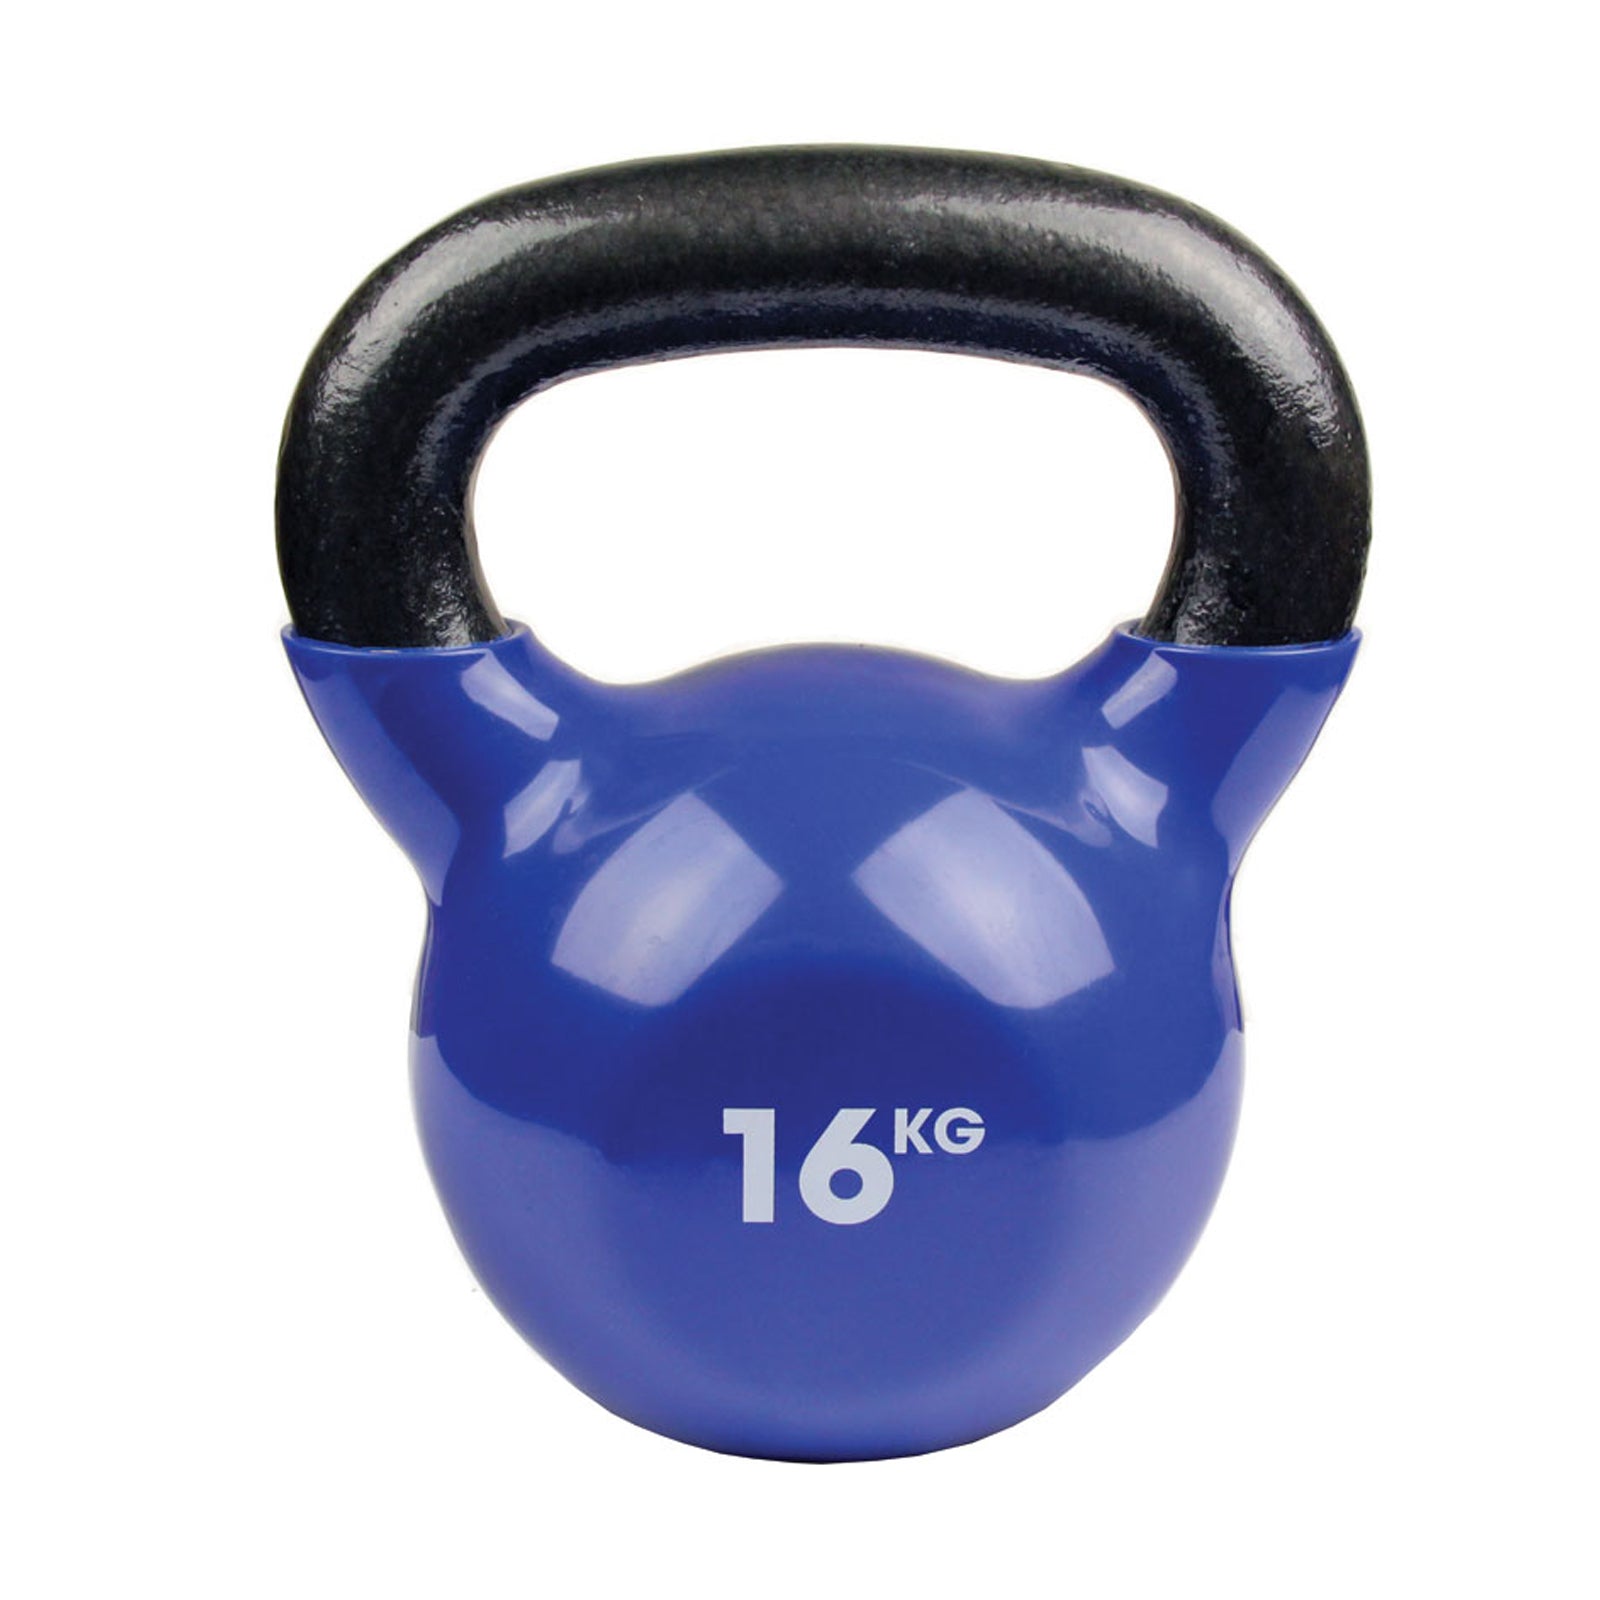 16Kg Kettlebell Blue Home Workout Fitness Mad